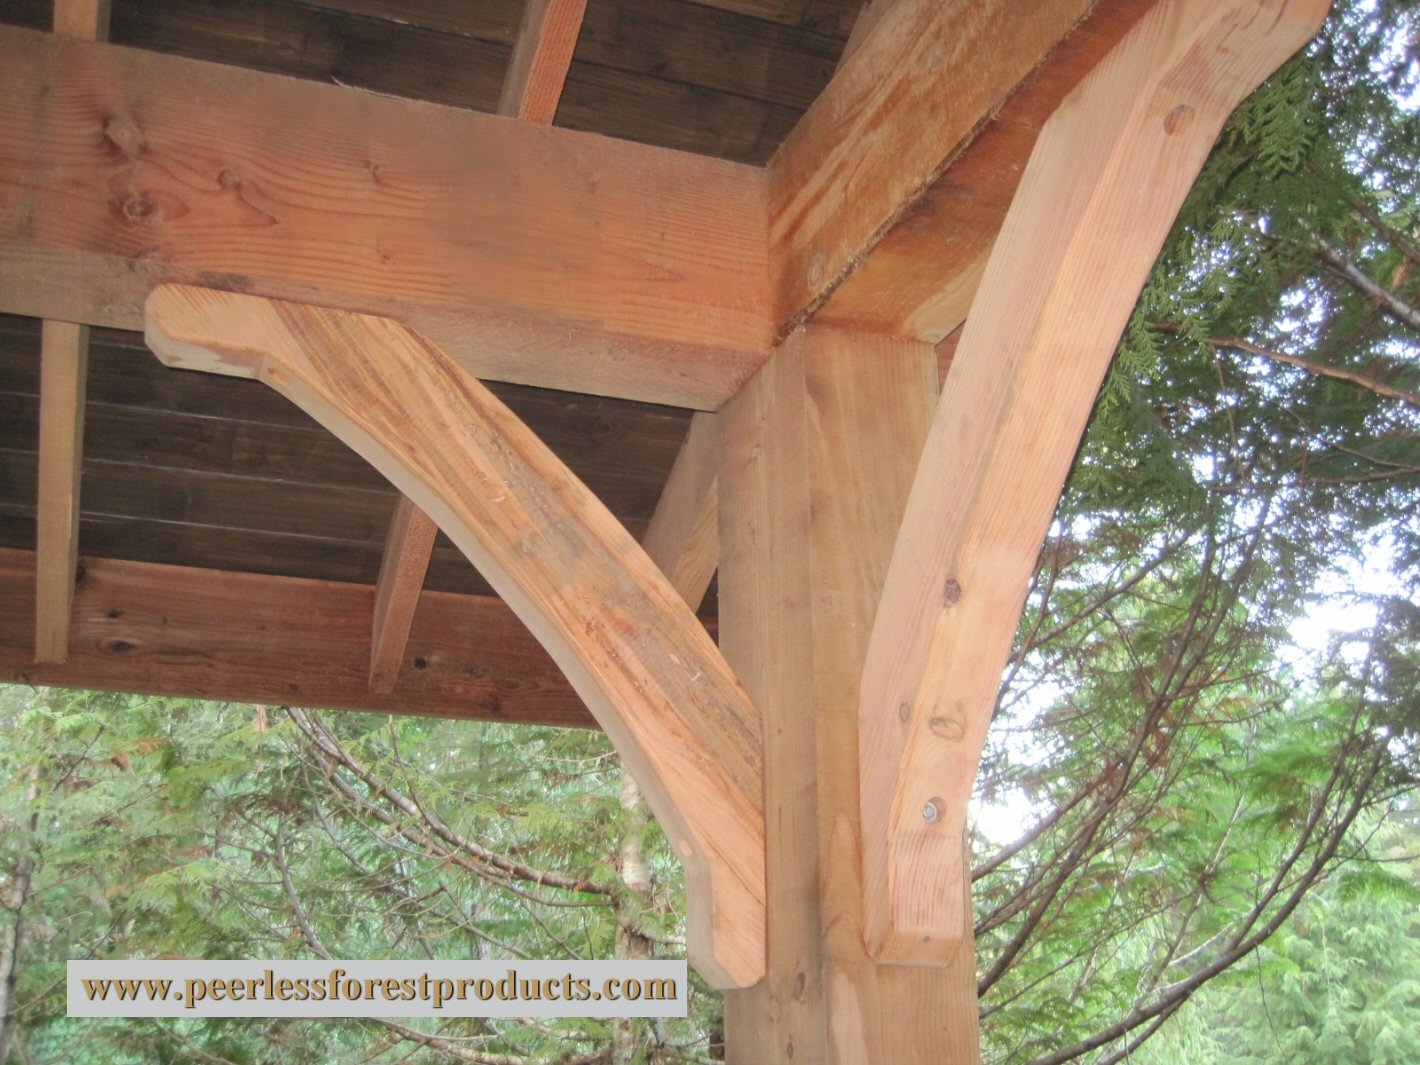 Peerless Post and Beam structure 6 Peerless Forest Products, Duncan, British Columbia 1420 x 1000